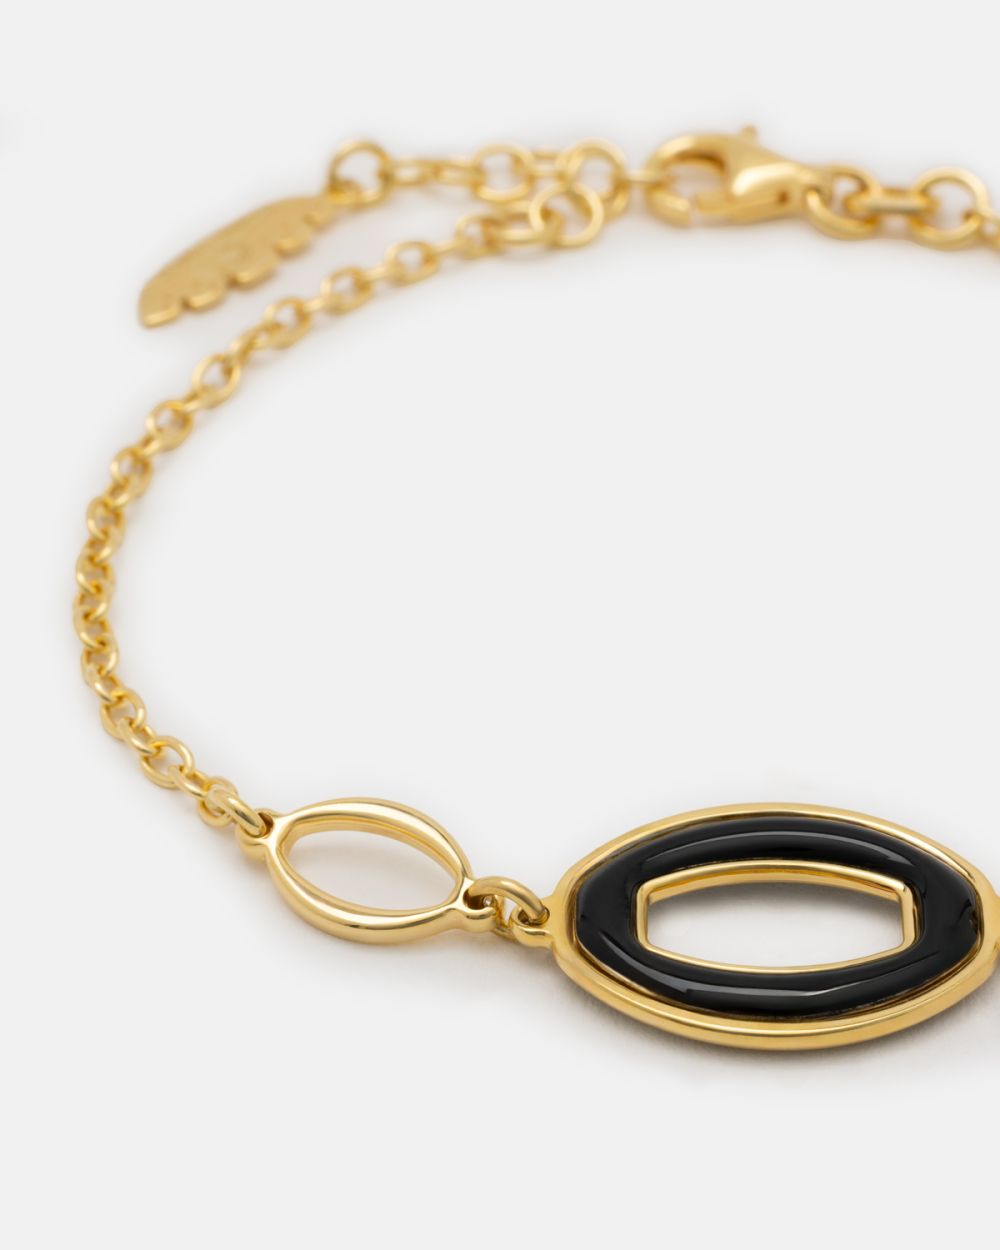 Moonless Bracelet in Gold Plated Silver